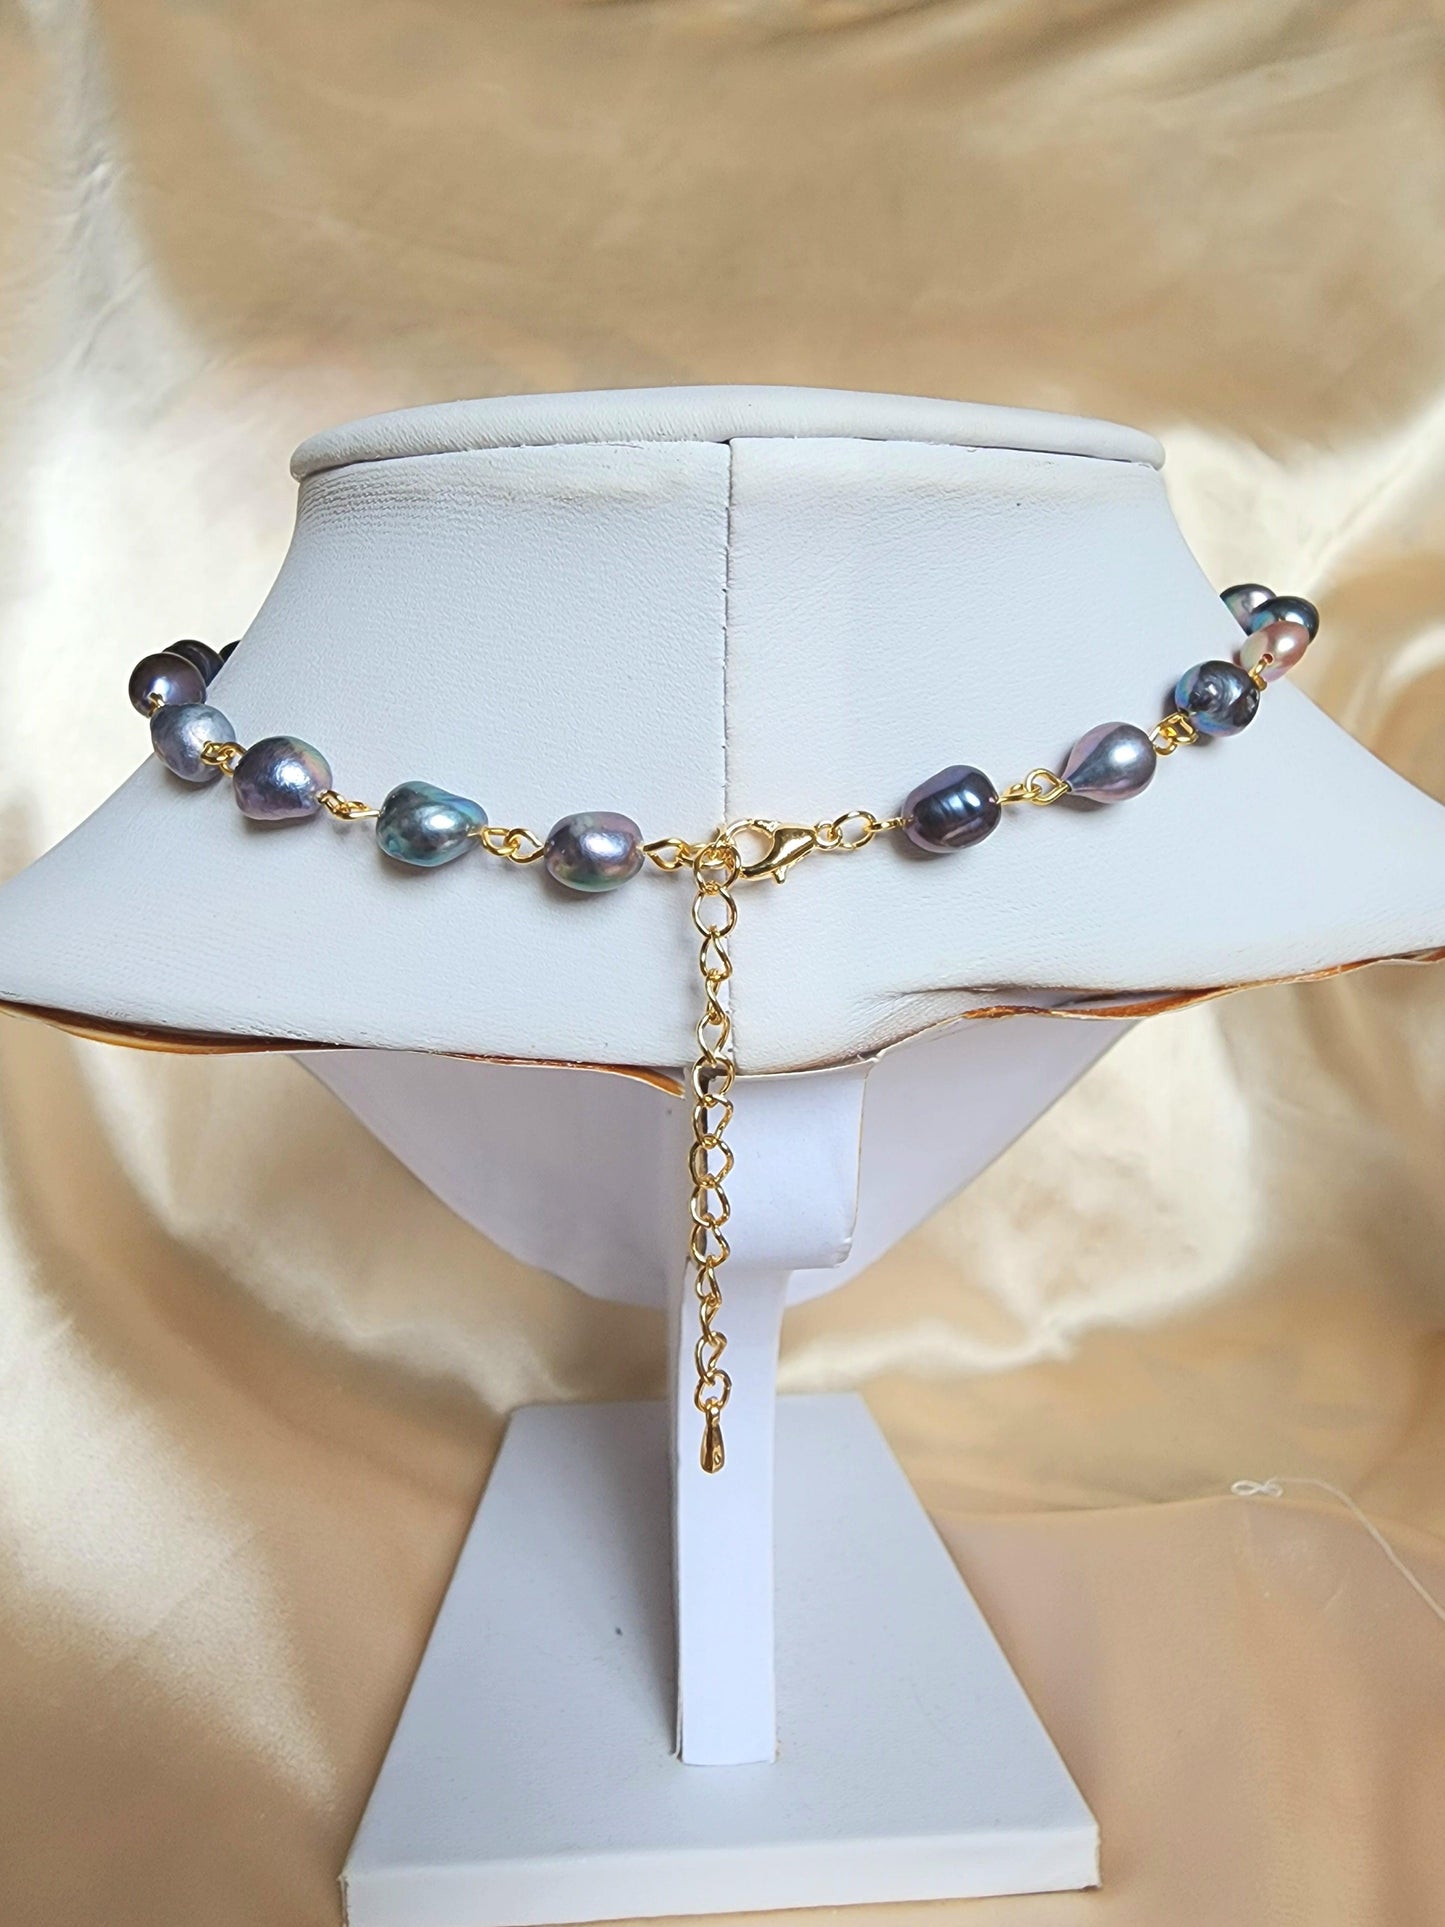 This elegant choker is crafted with gold-plated brass, stainless steel findings, and tarnish-resistant copper wire, featuring a romantic design of flower-shaped black freshwater pearls alongside iridescent black seed bead details.